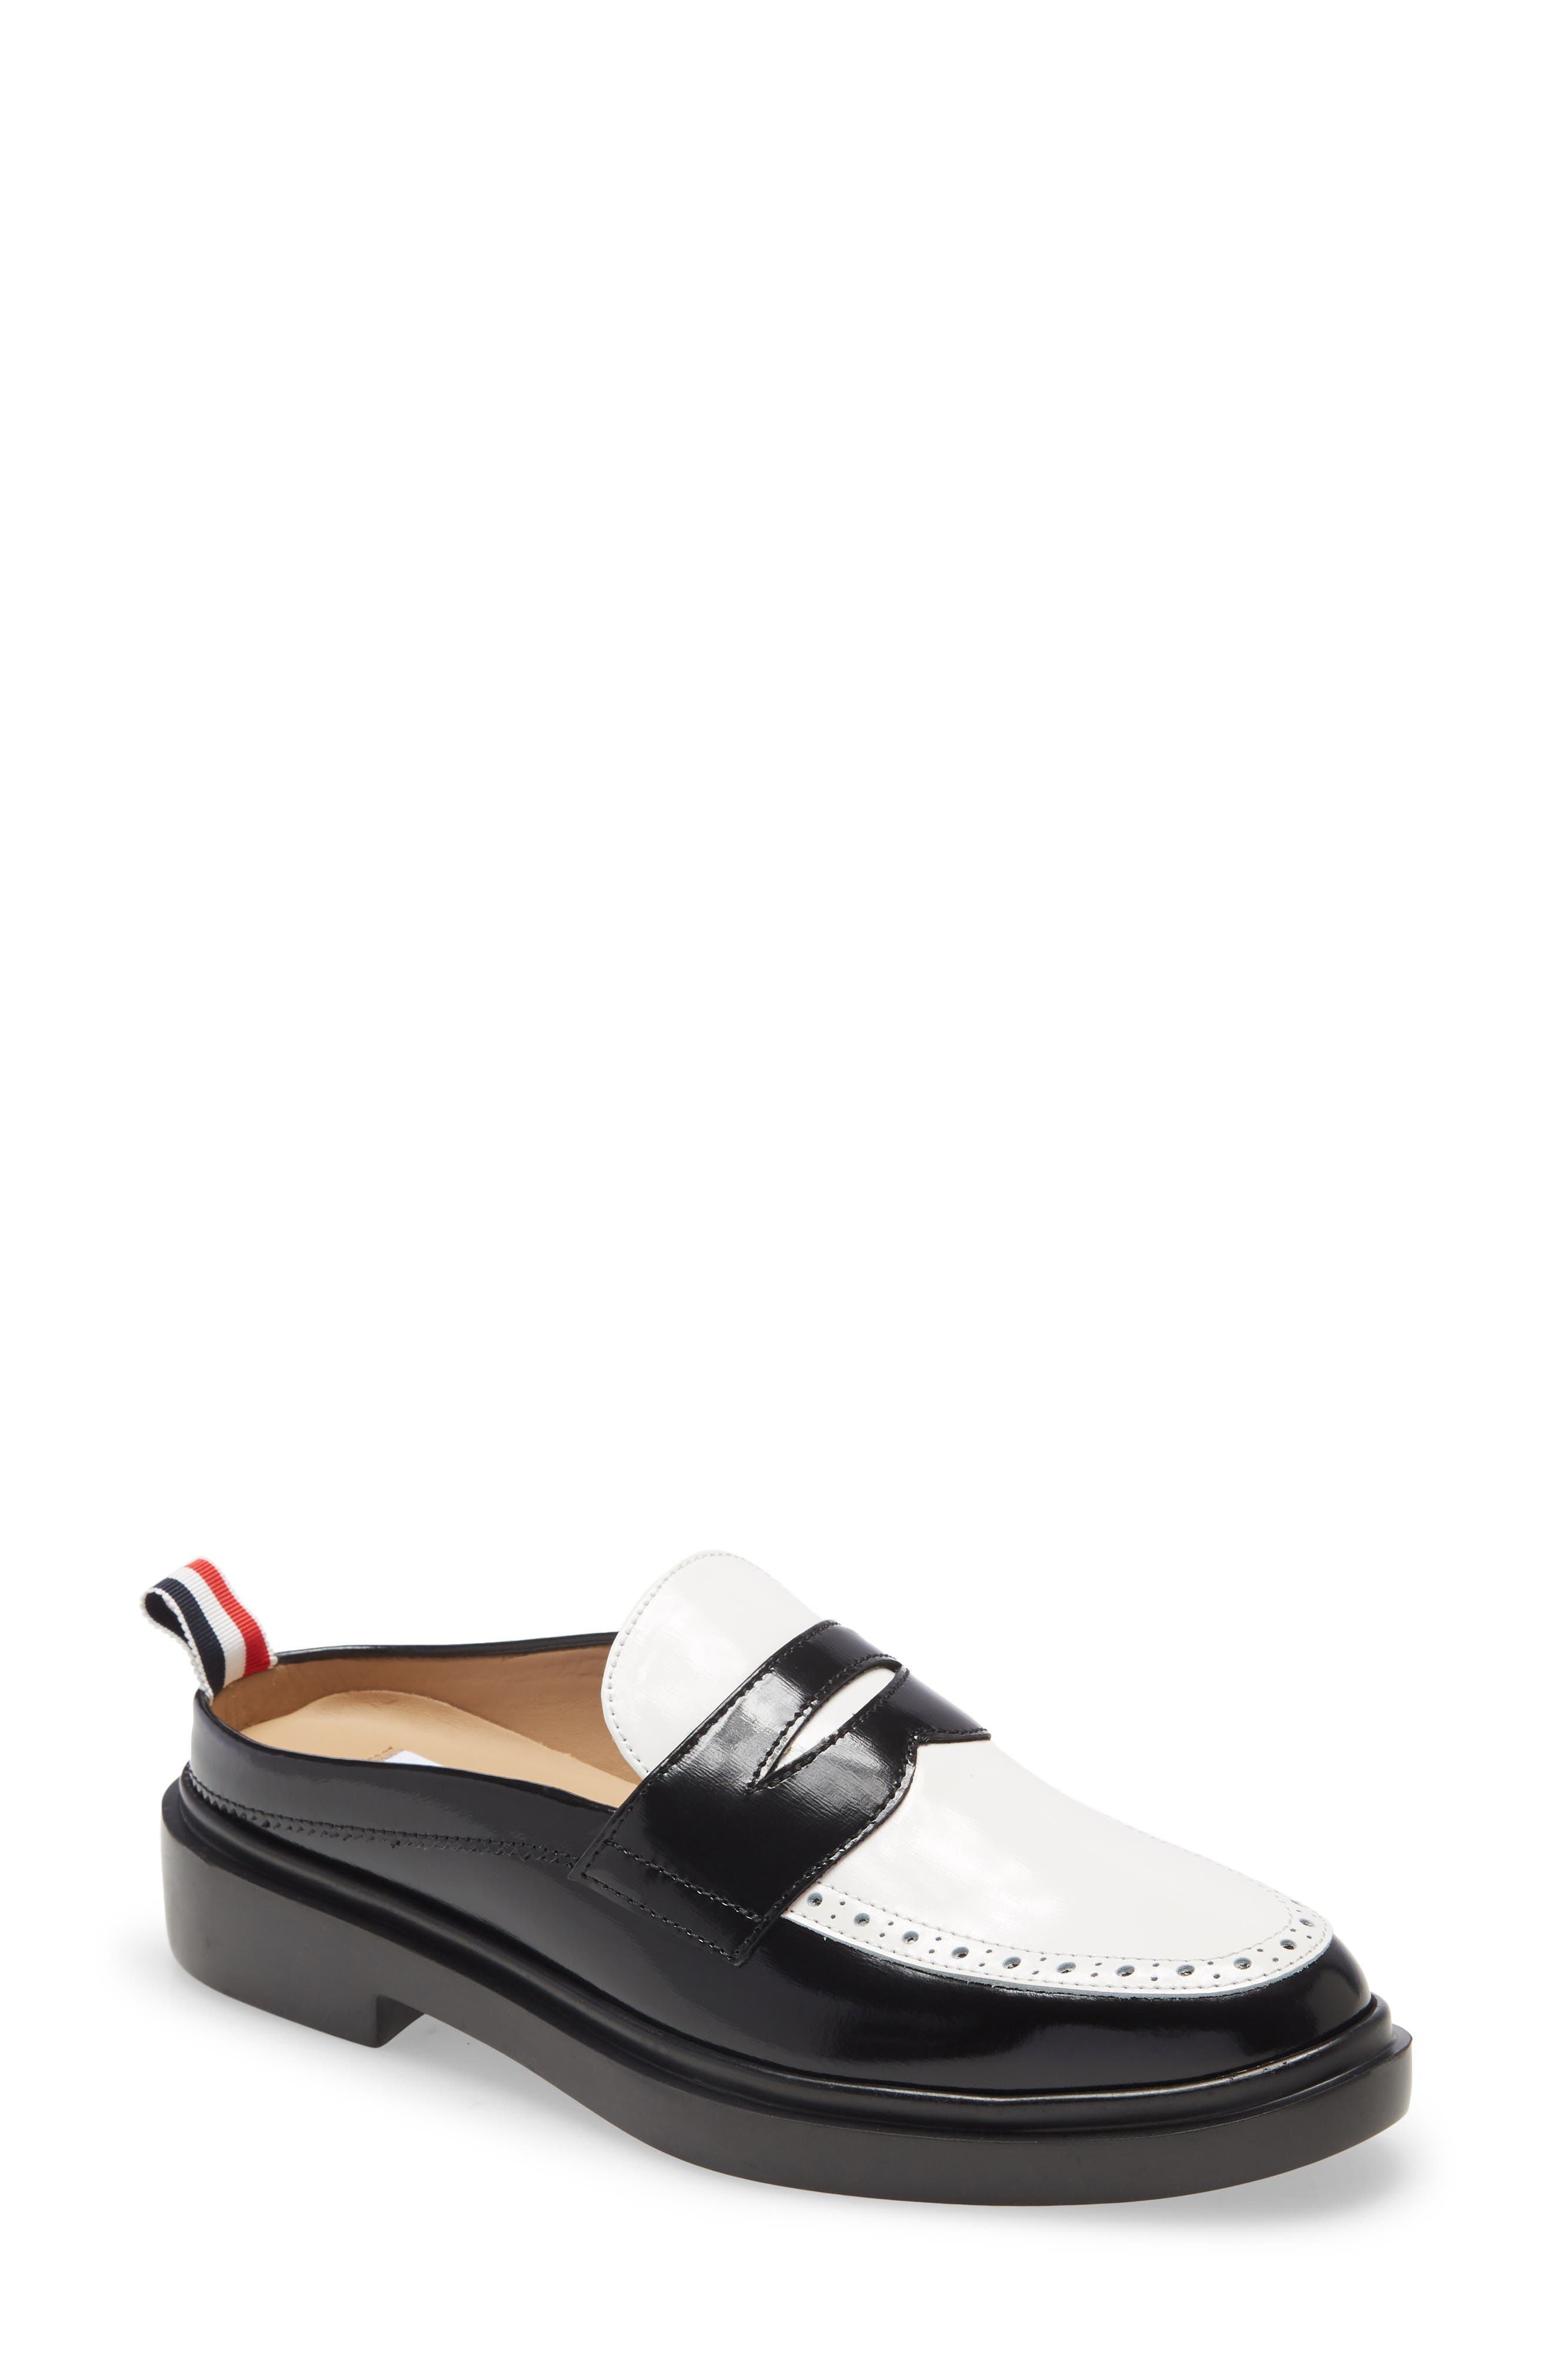 black and white penny loafers womens